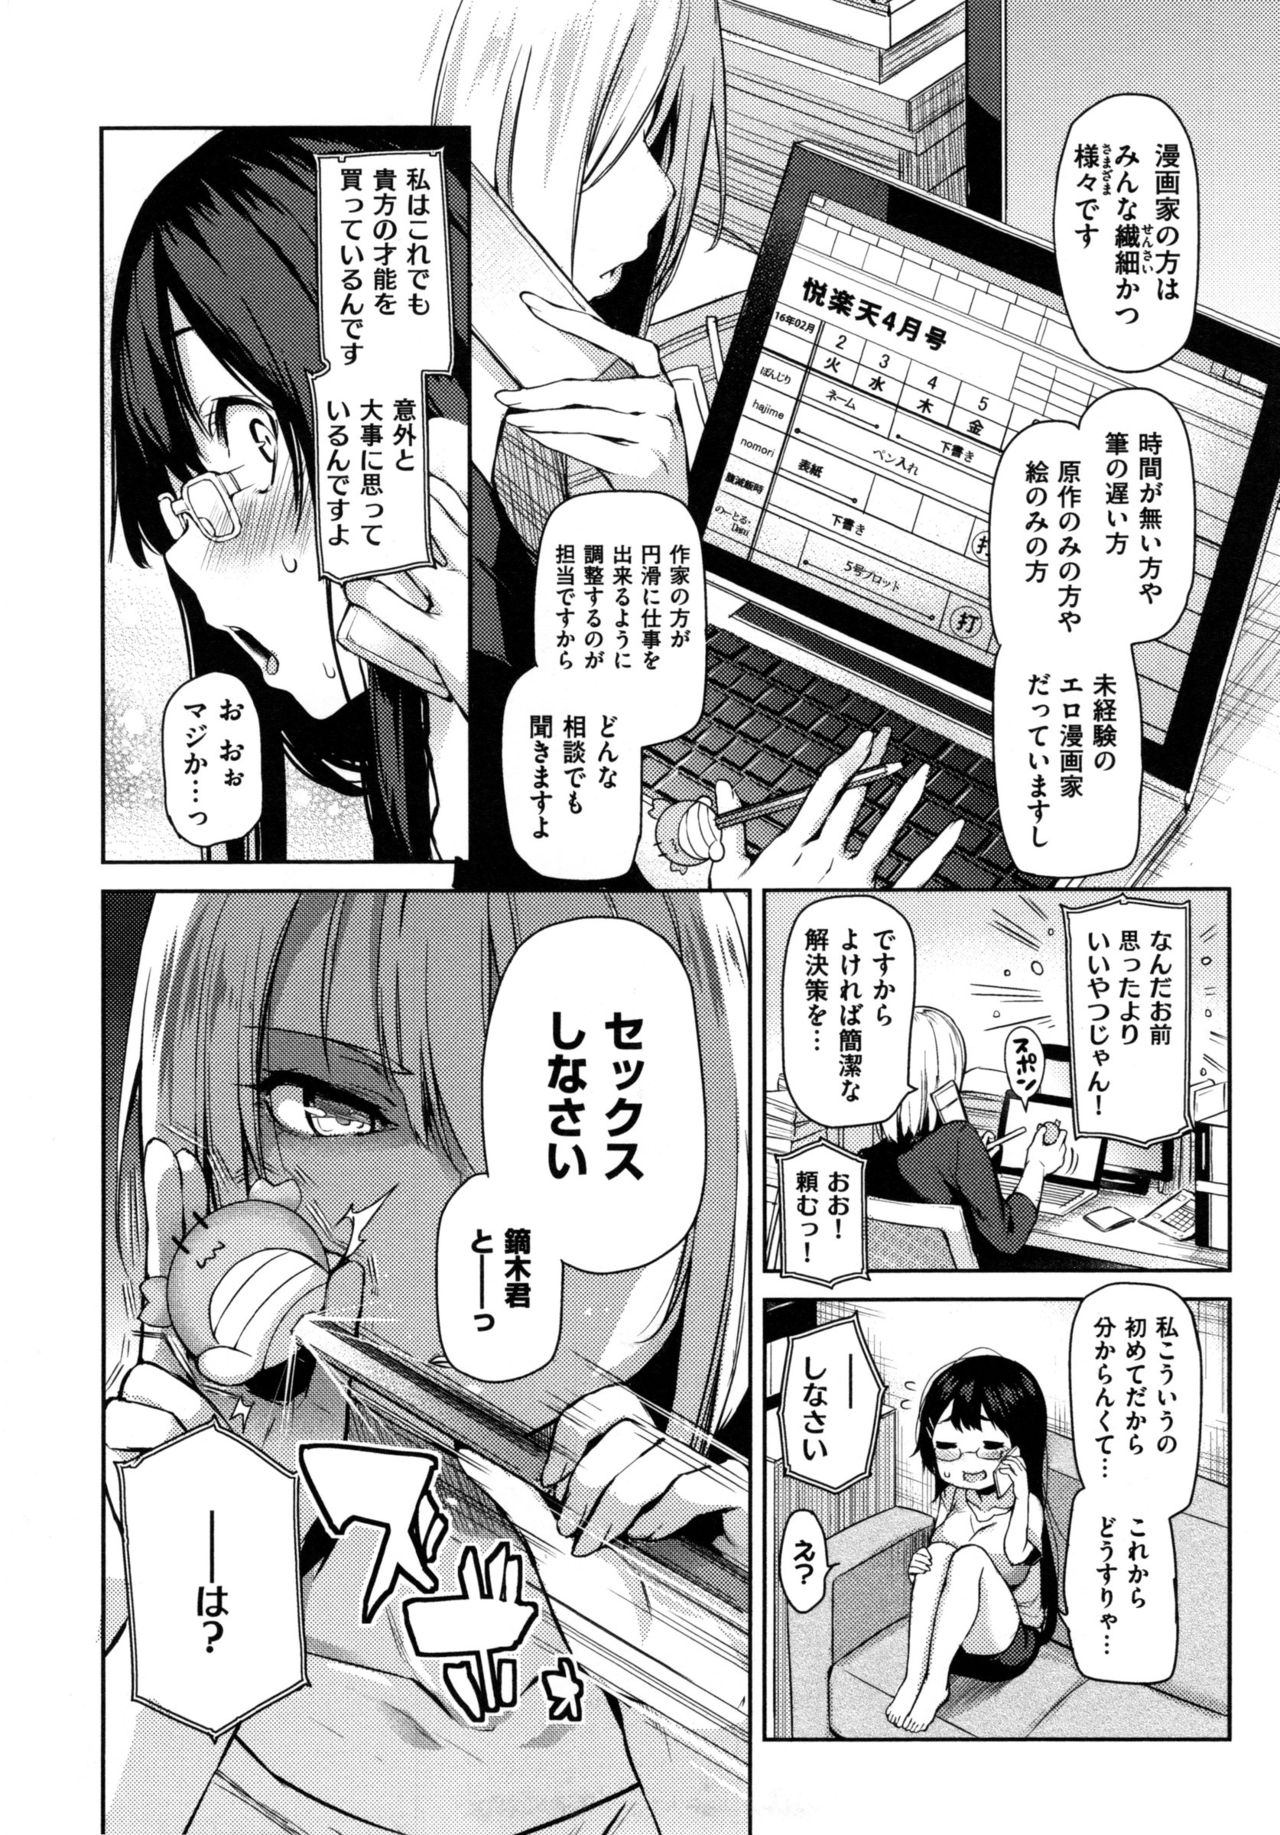 [Michiking] Shujuu Ecstasy - Sexual Relation of Master and Servant.  - page 51 full